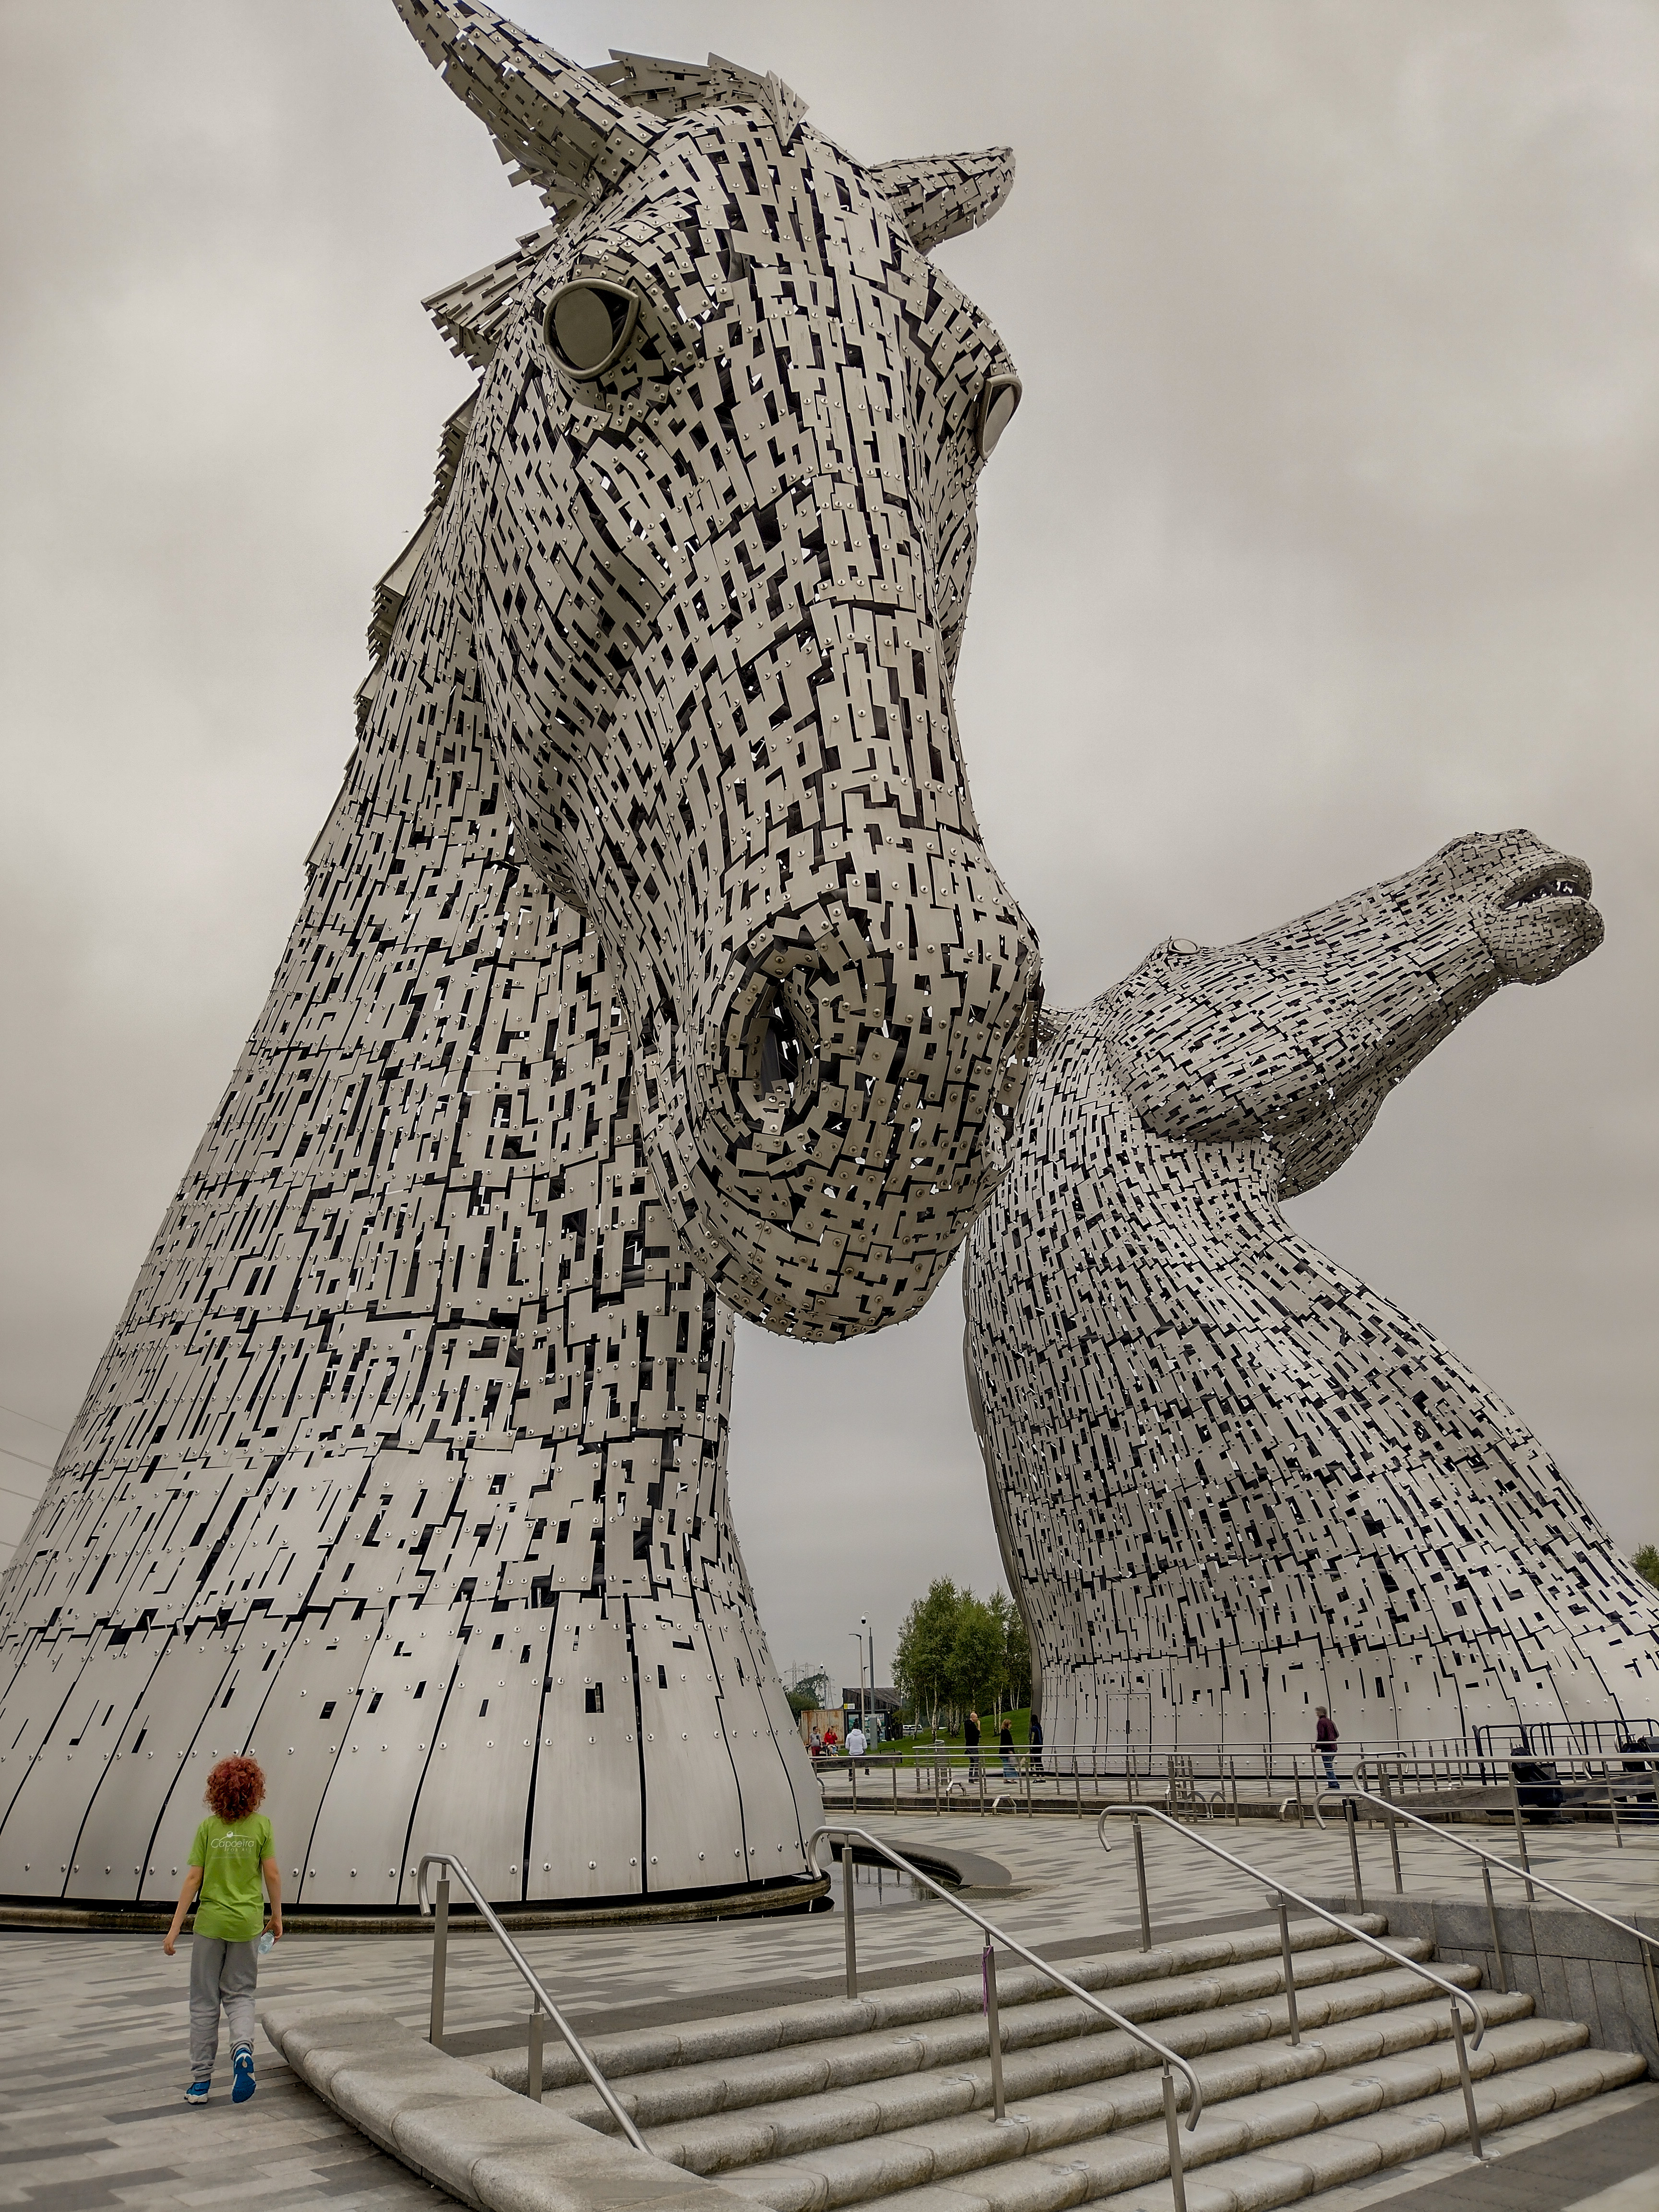 Child by The Kelpies in Falkirk, Scotland